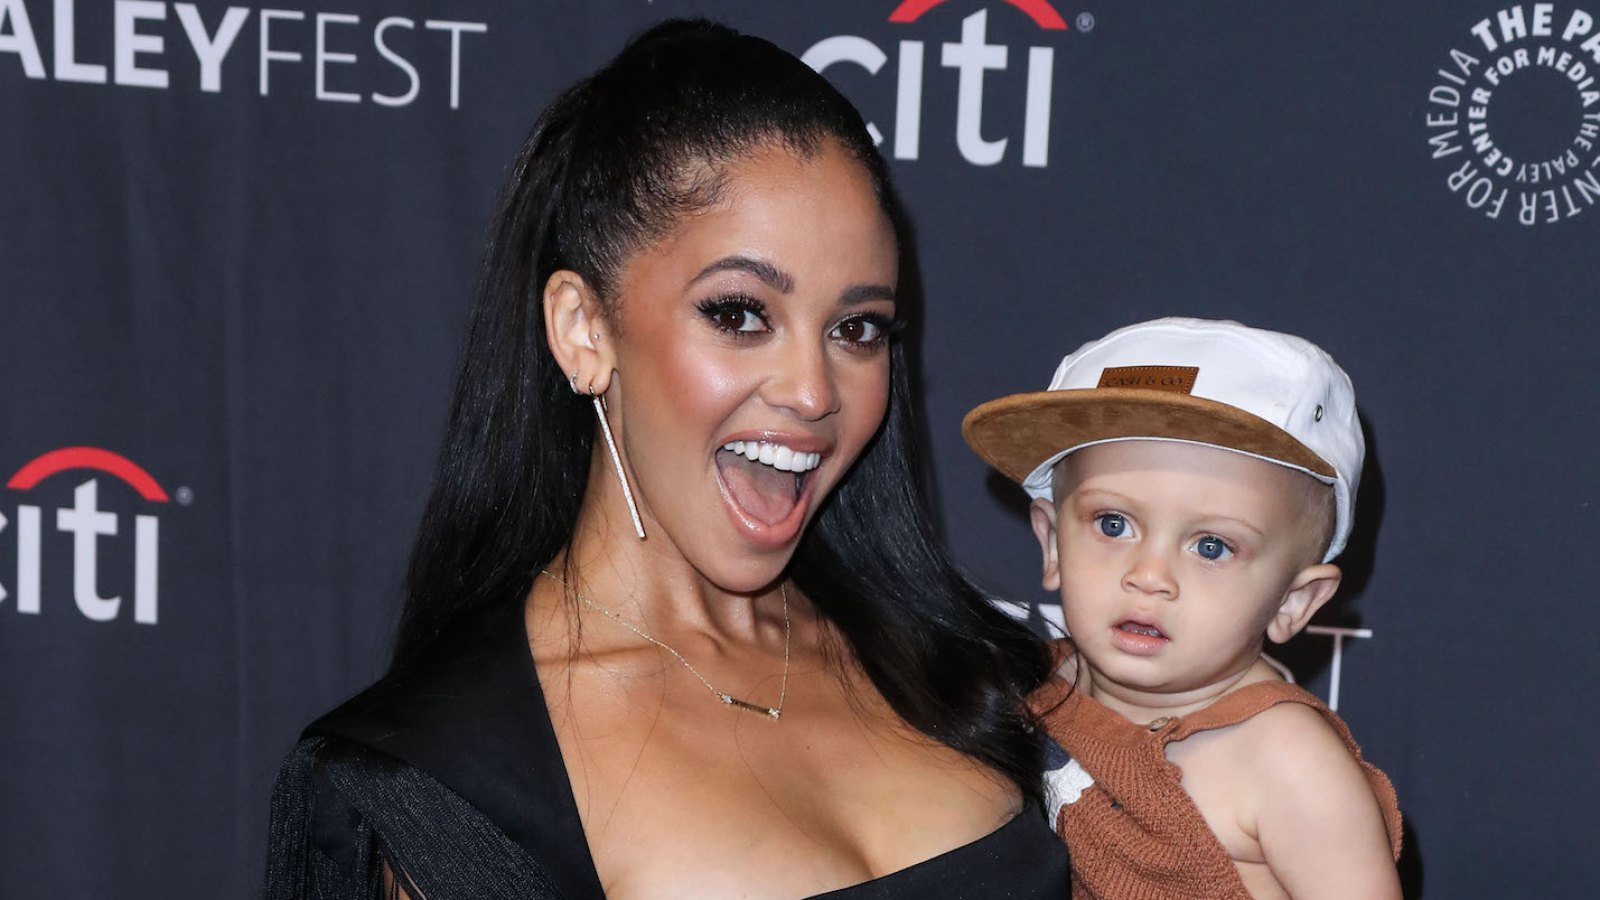 Riverdale's Vanessa Morgan Offers Glimpse at New BF Bonding With Son River